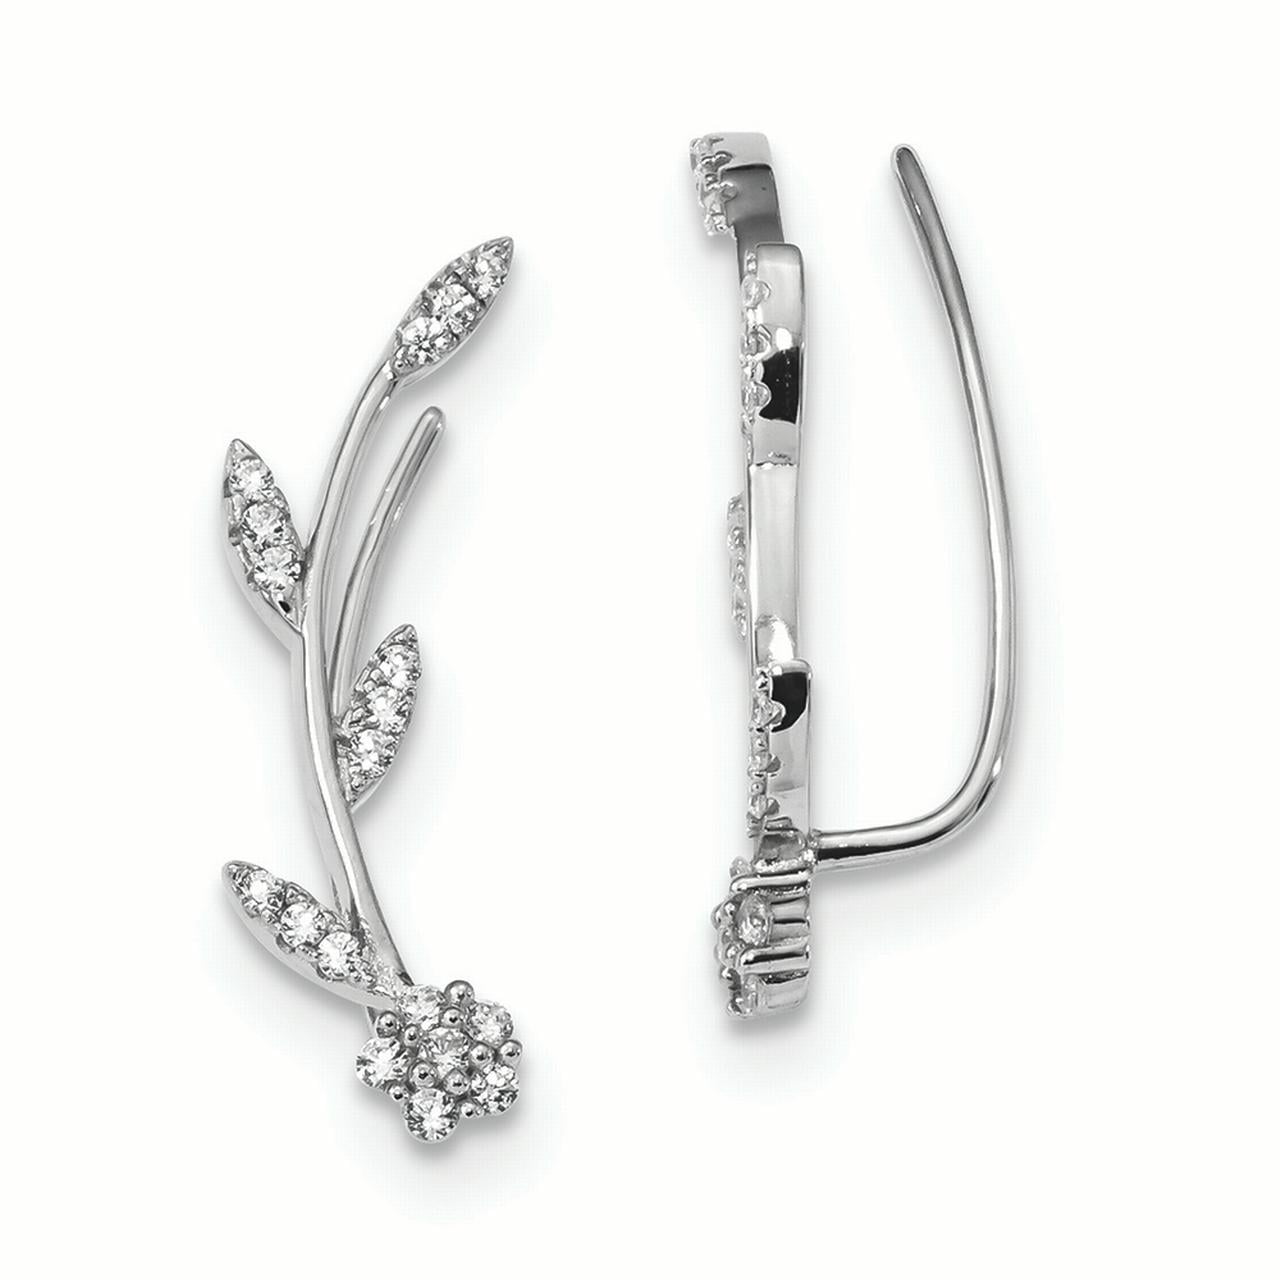 Womans Crawler Climber PIN Earrings With CZ FLOWER Gemstones Sterling Silver